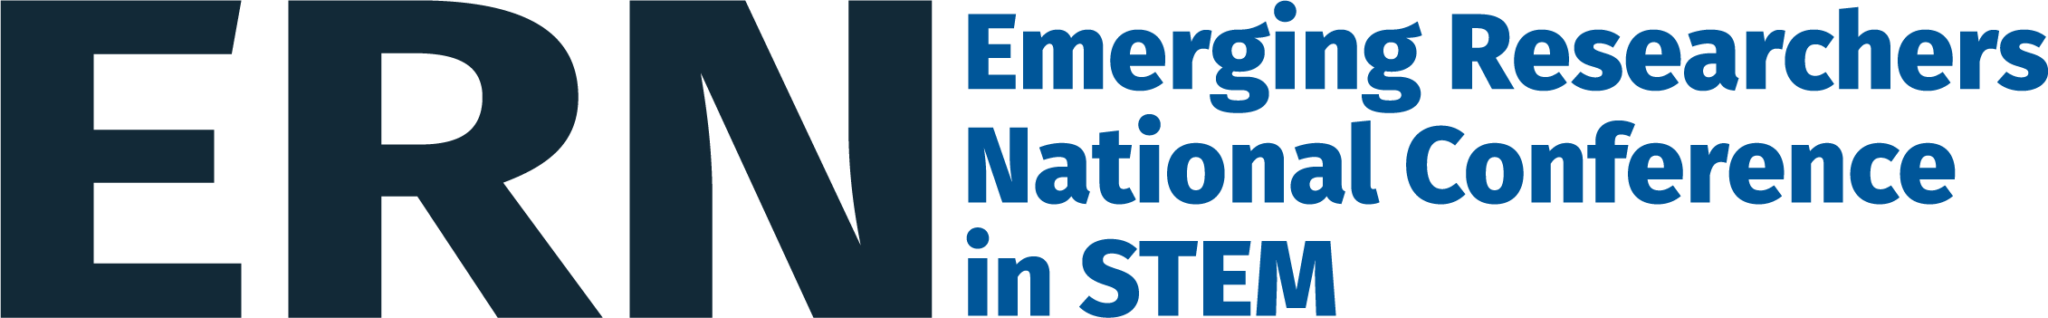 Emerging Researchers National Conference in STEM